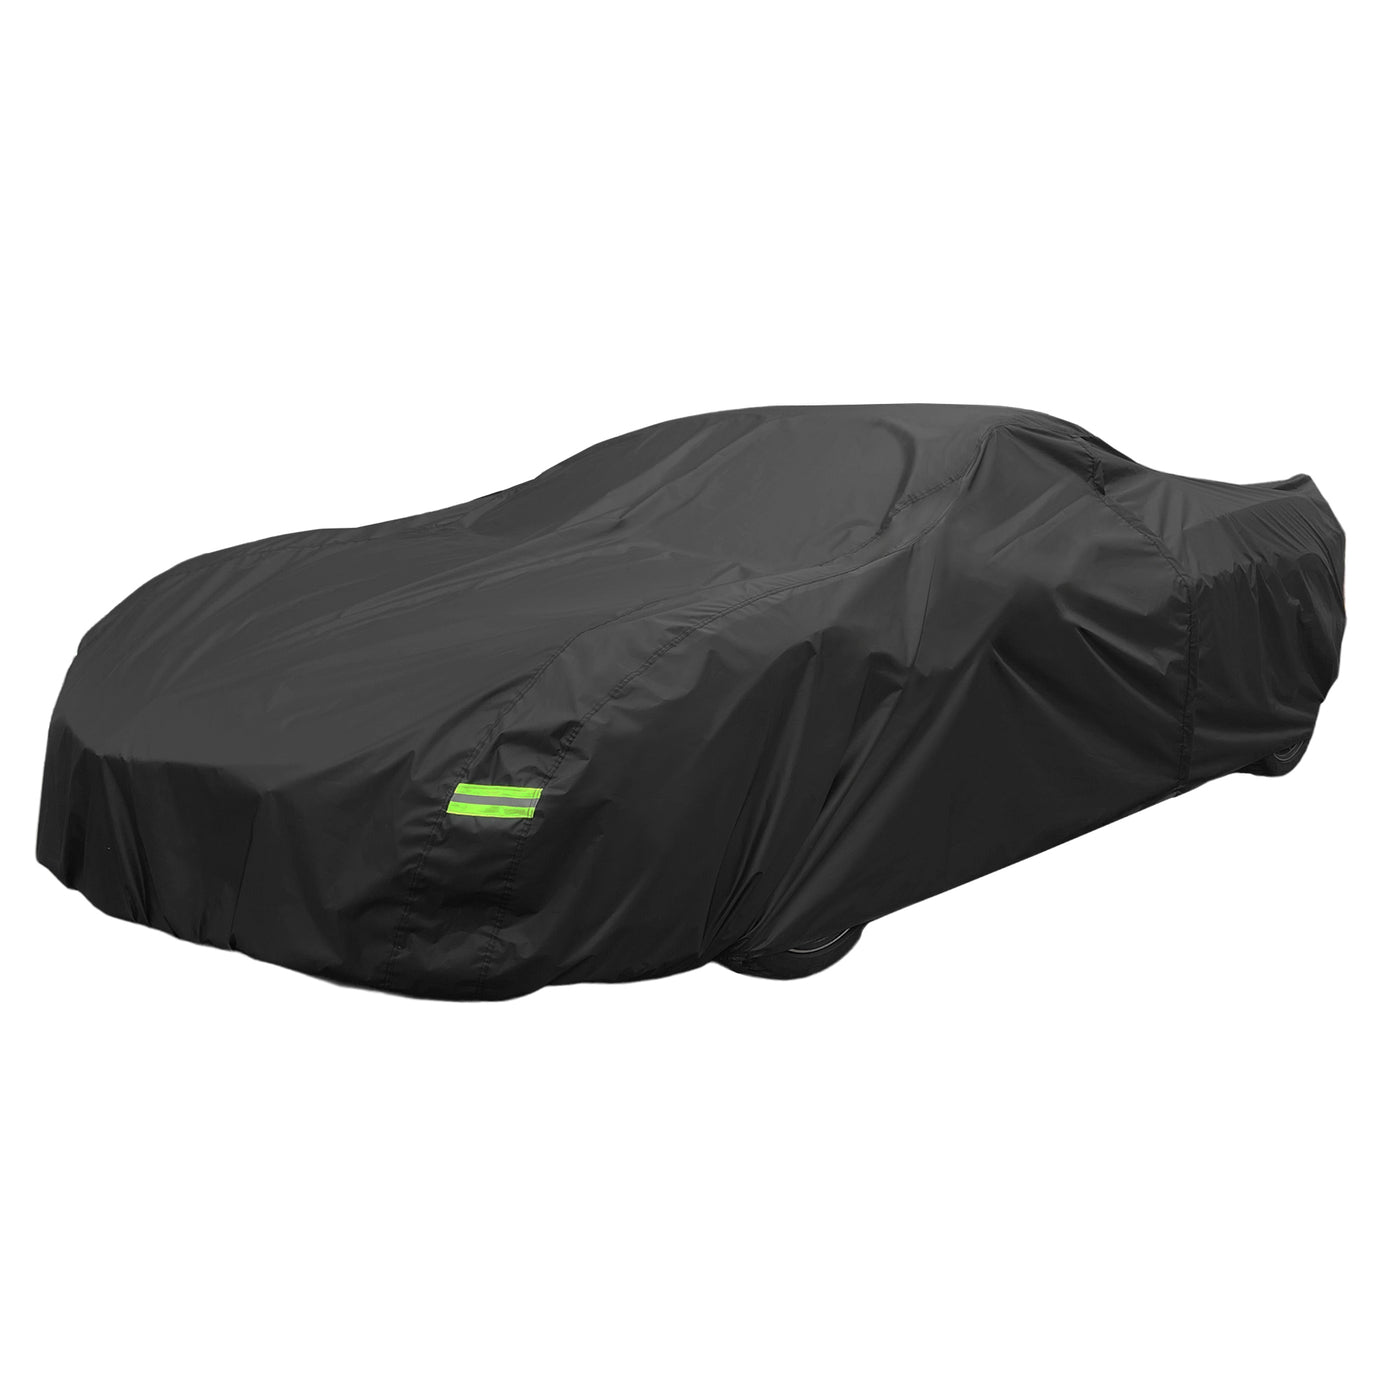 X AUTOHAUX Waterproof Car Cover for Chevrolet Corvette C3 1968-1982 Outdoor Full Car Cover with Zipper Door for Snow Rain Dust All Weather Protection Black